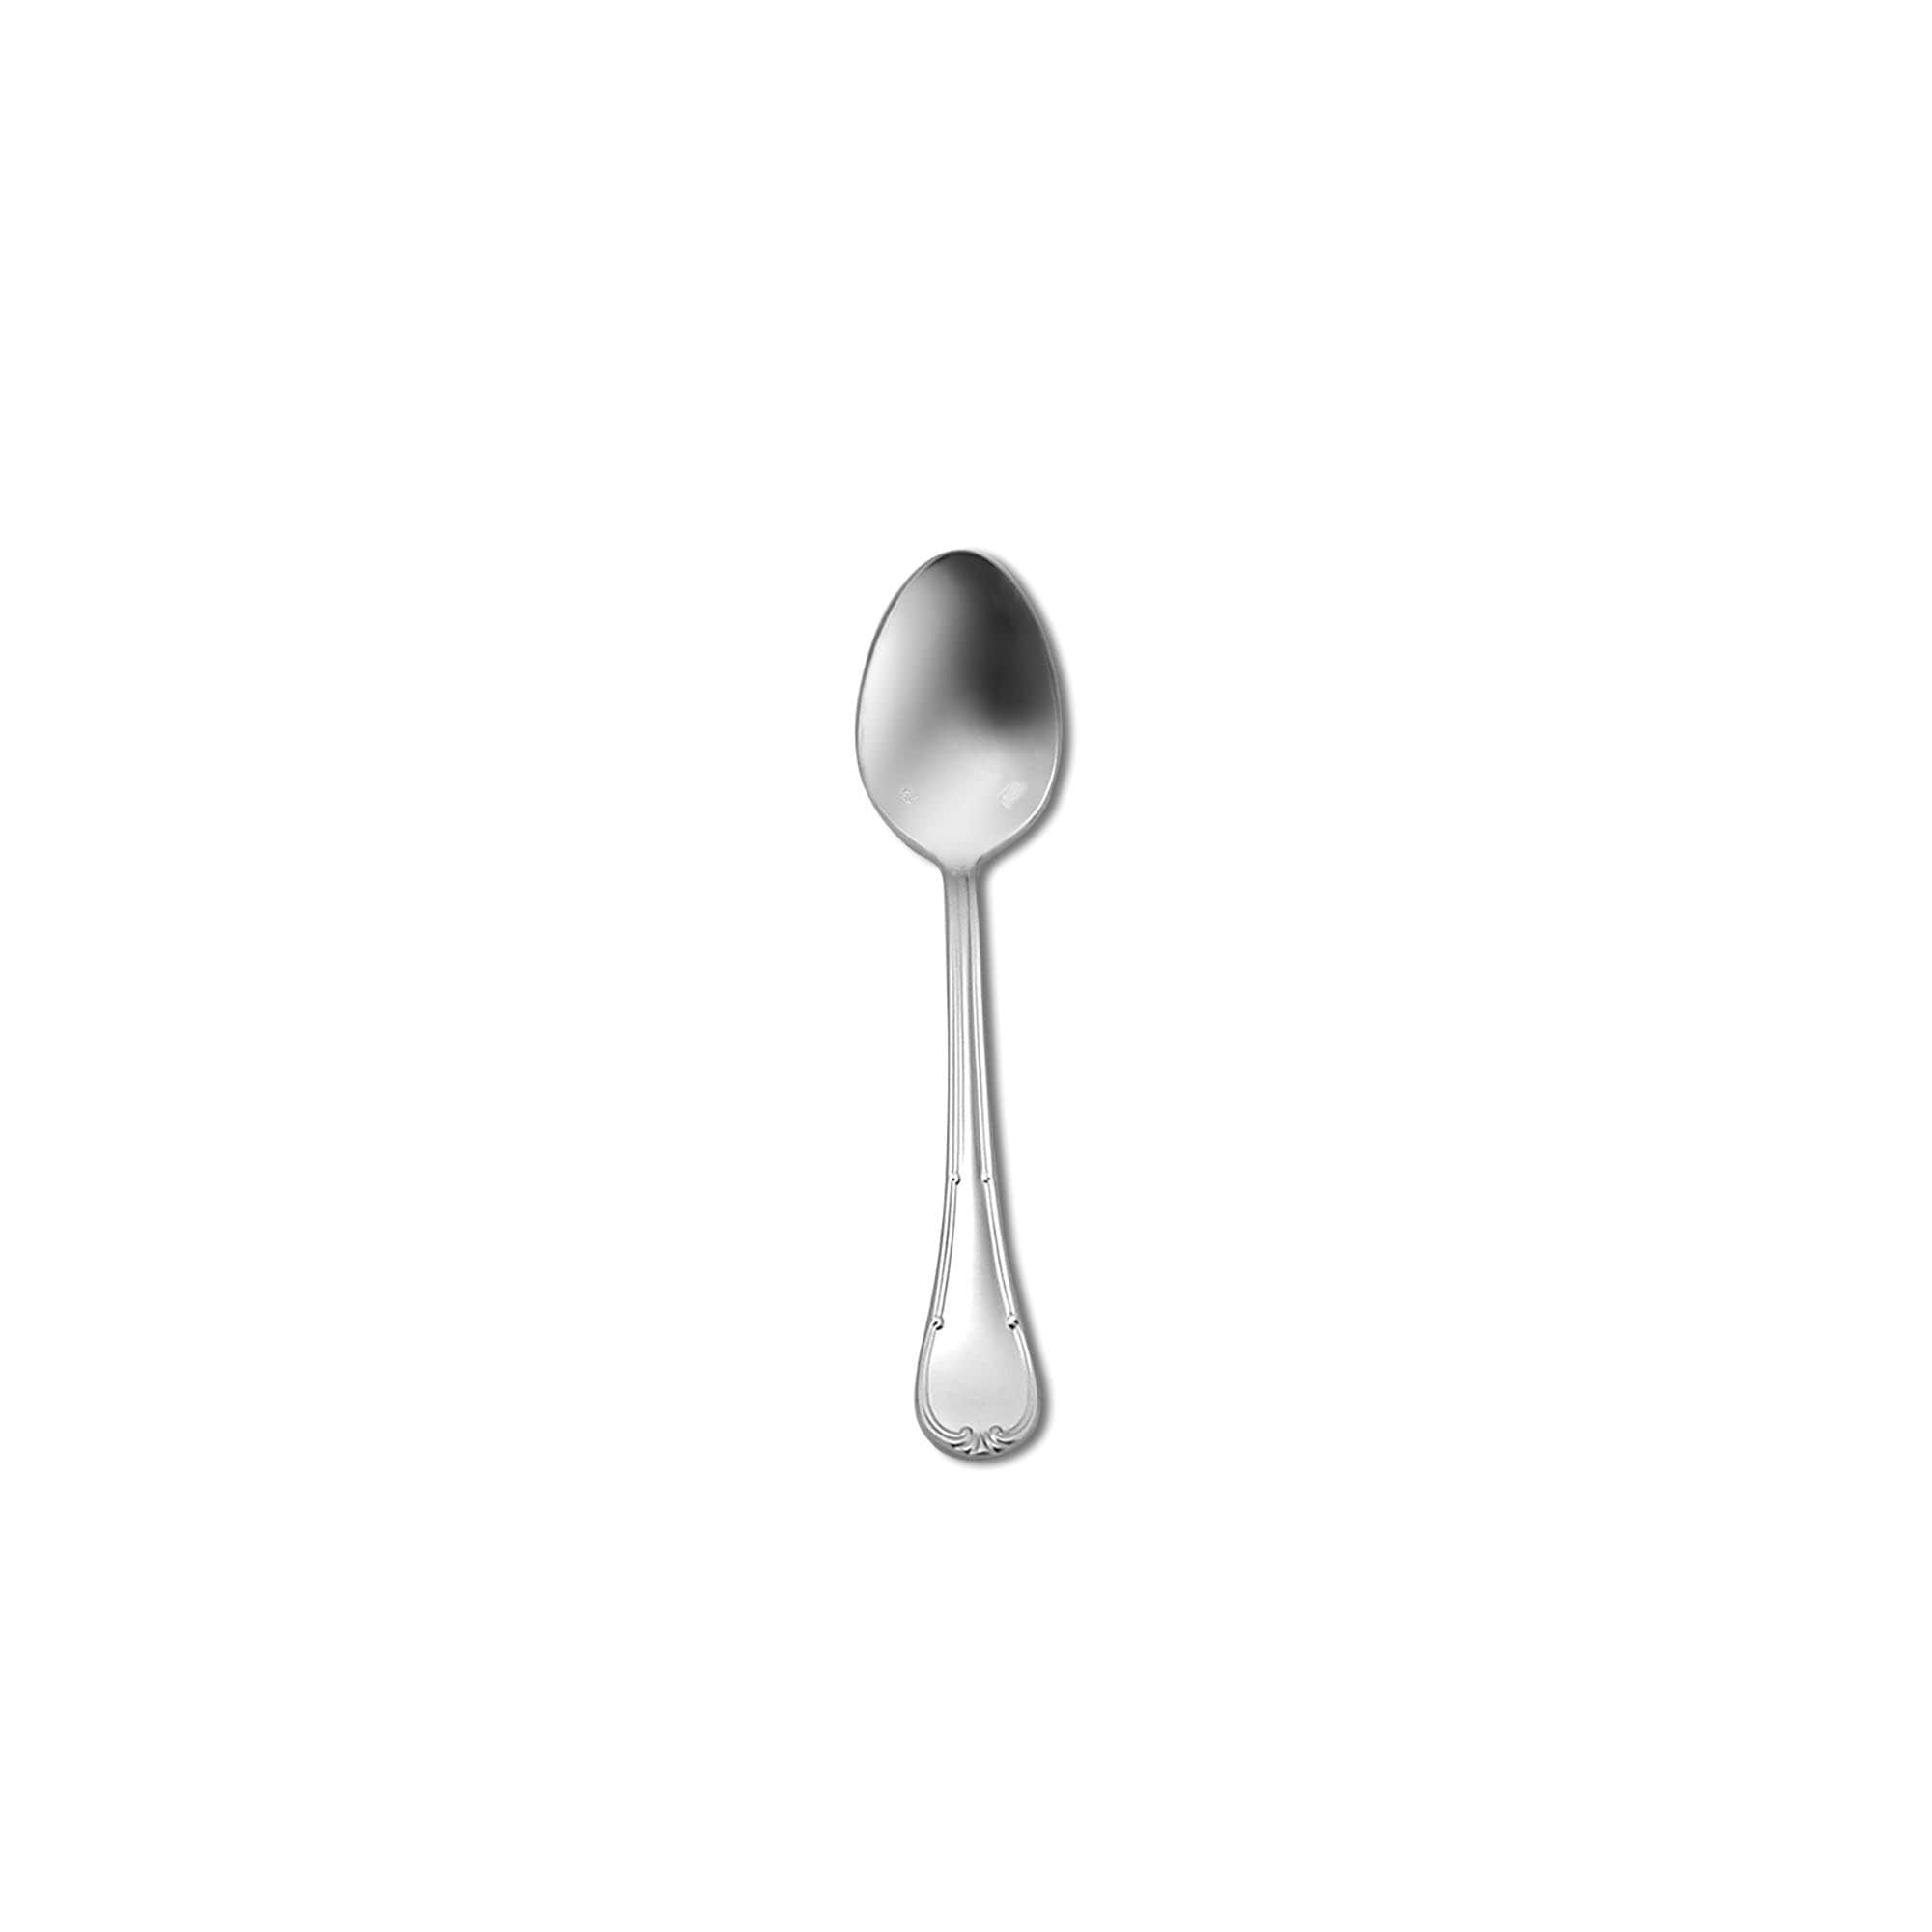 https://ak1.ostkcdn.com/images/products/is/images/direct/b9dc49068db4fdc13820a4d3750ebad17d6d6f33/Sant%27-Andrea-Silverplate-Donizetti-Teaspoons%2C-Euro-Size-%28Set-of-12%29-by-Oneida.jpg